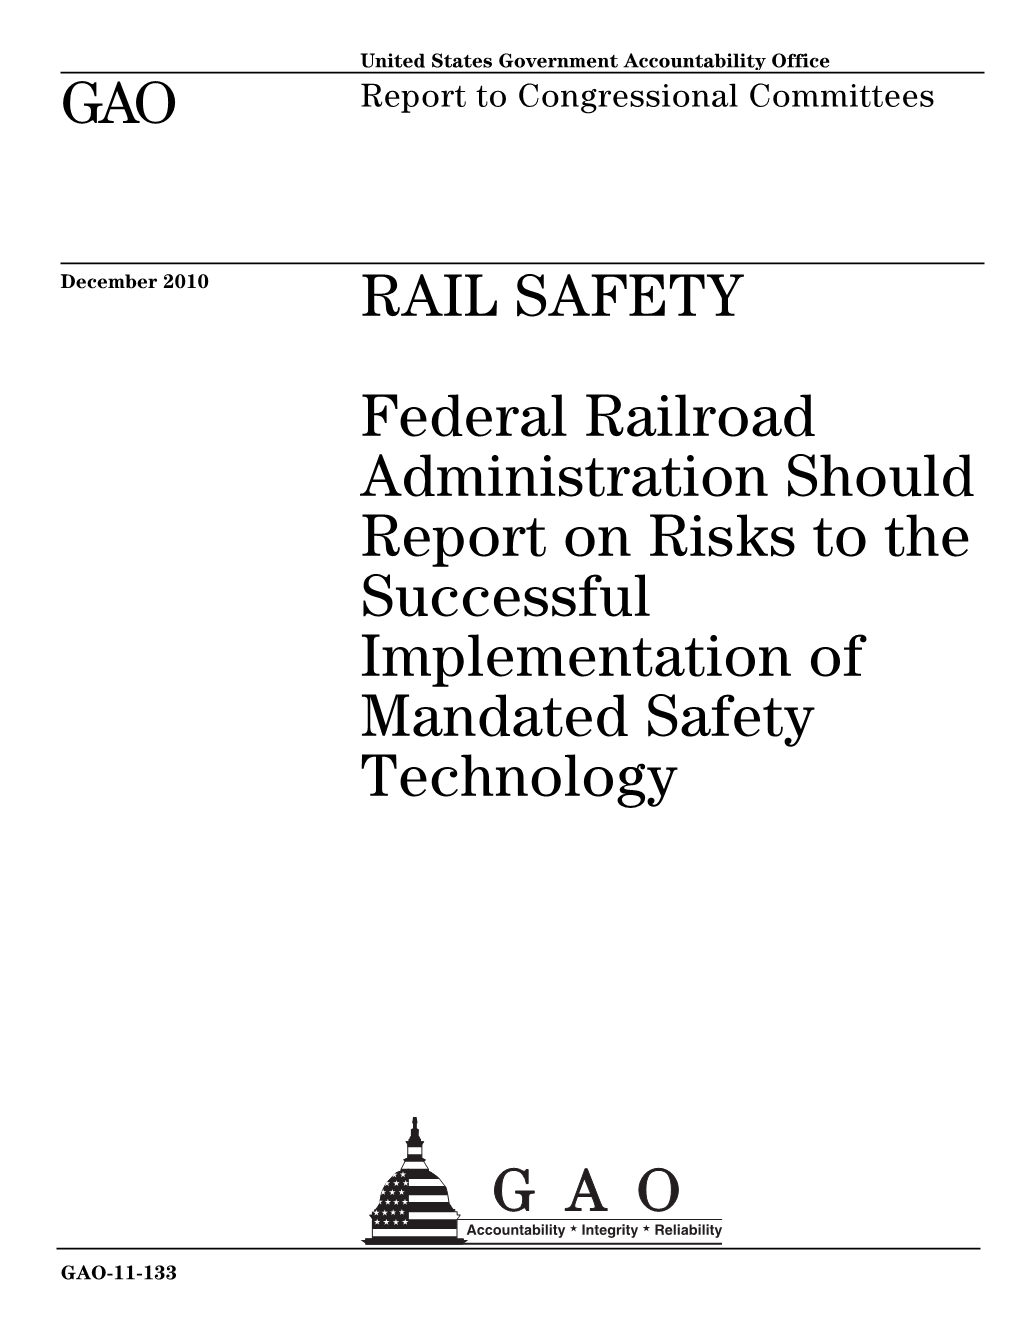 Federal Railroad Administration Should Report on Risks to the Successful Implementation of Mandated Safety Technology